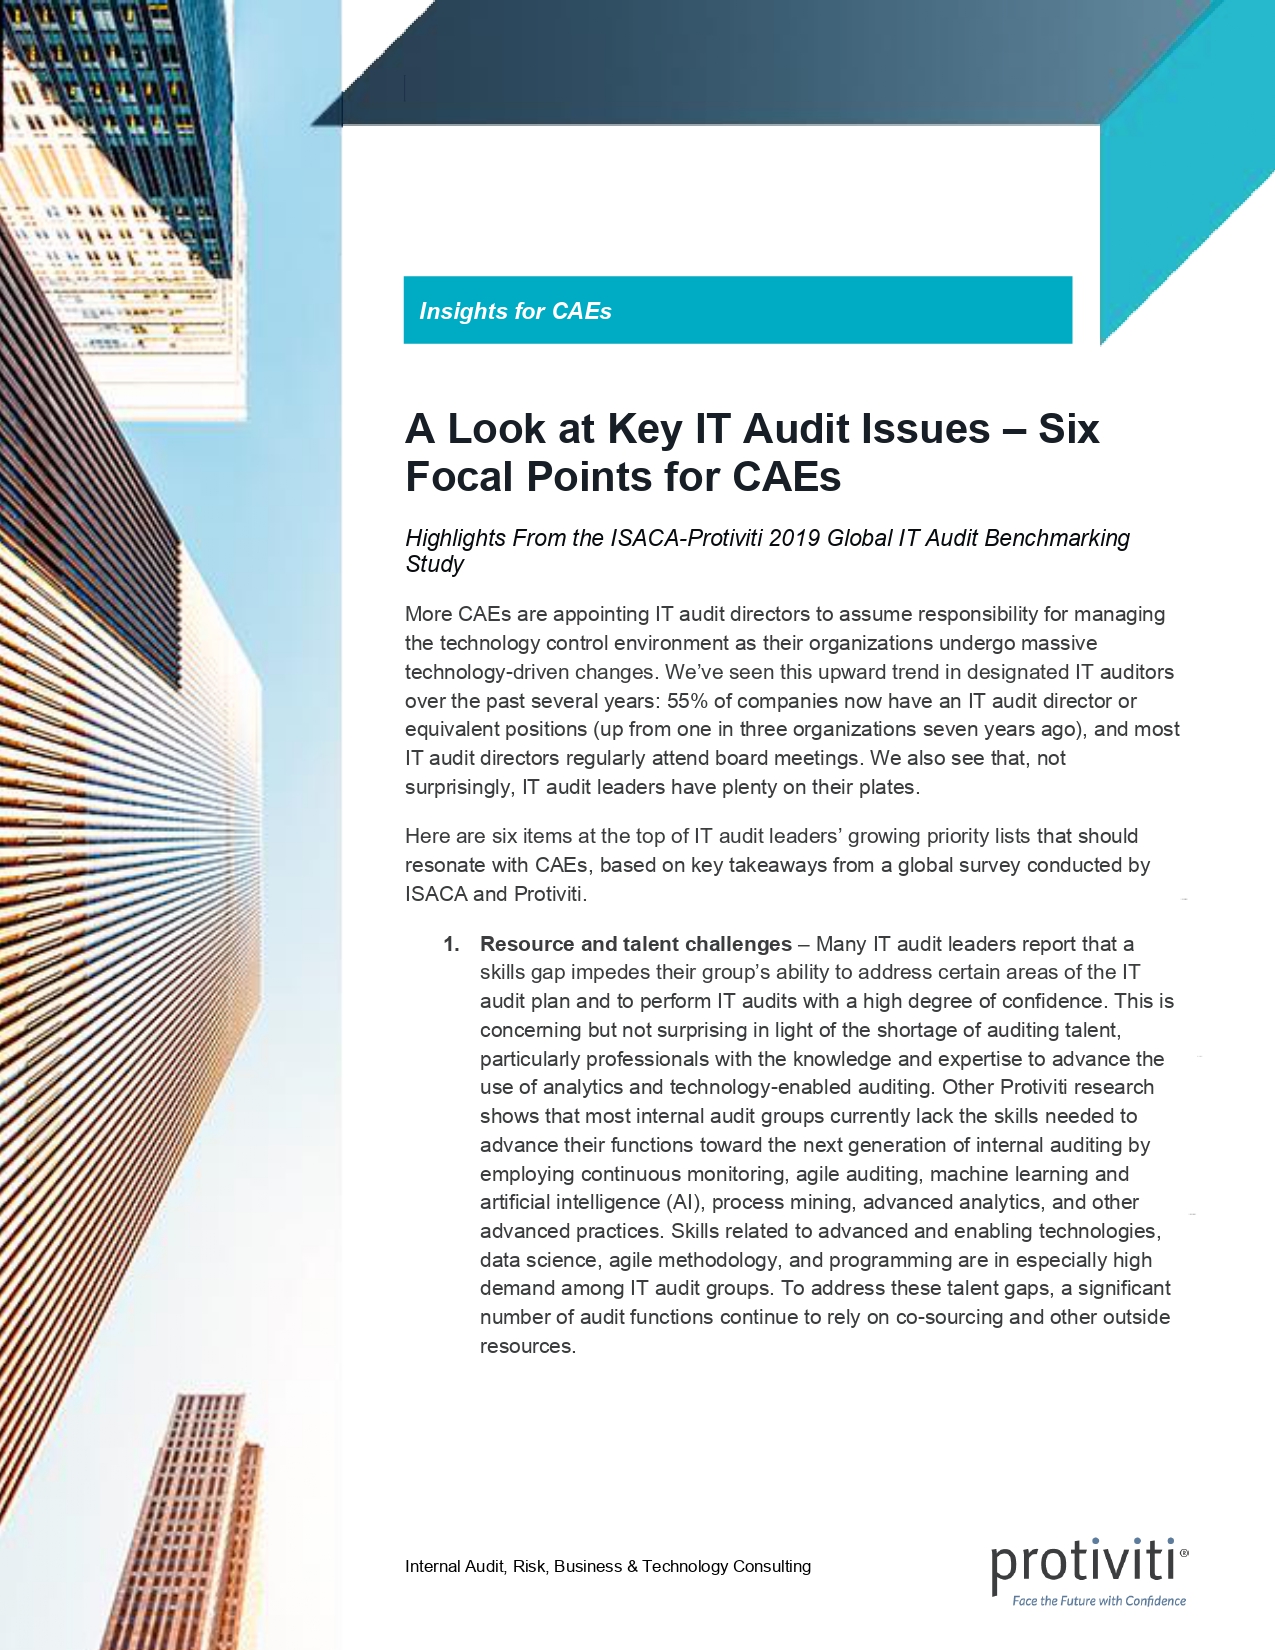 Screenshot of the first page of A Look at Key IT Audit Issues Six Focal Points for CAEs